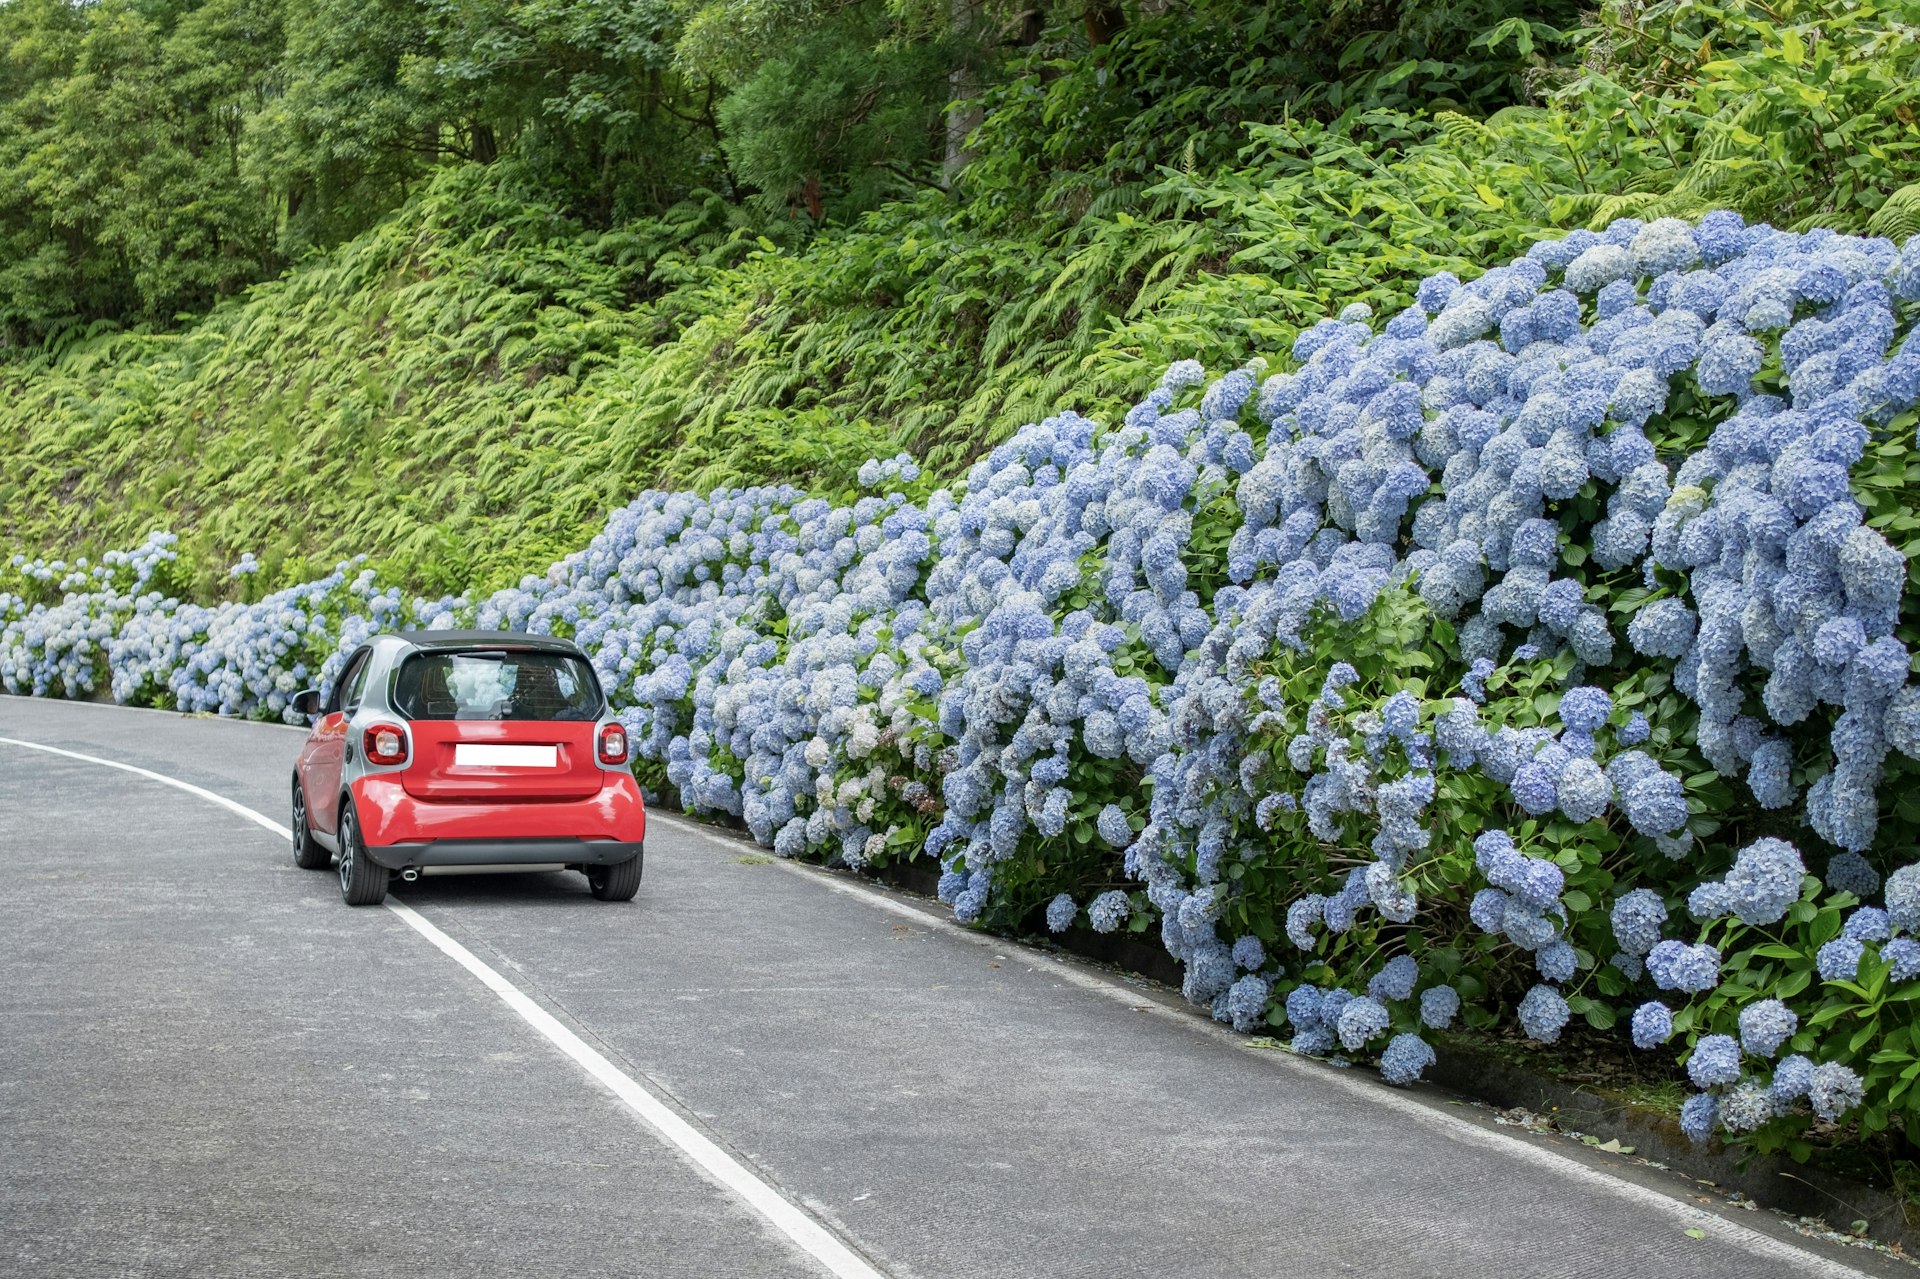 A small red car drives by a bank of blue hydrangea bushes in Sete Cidades, São Miguel, Azores, Portugal